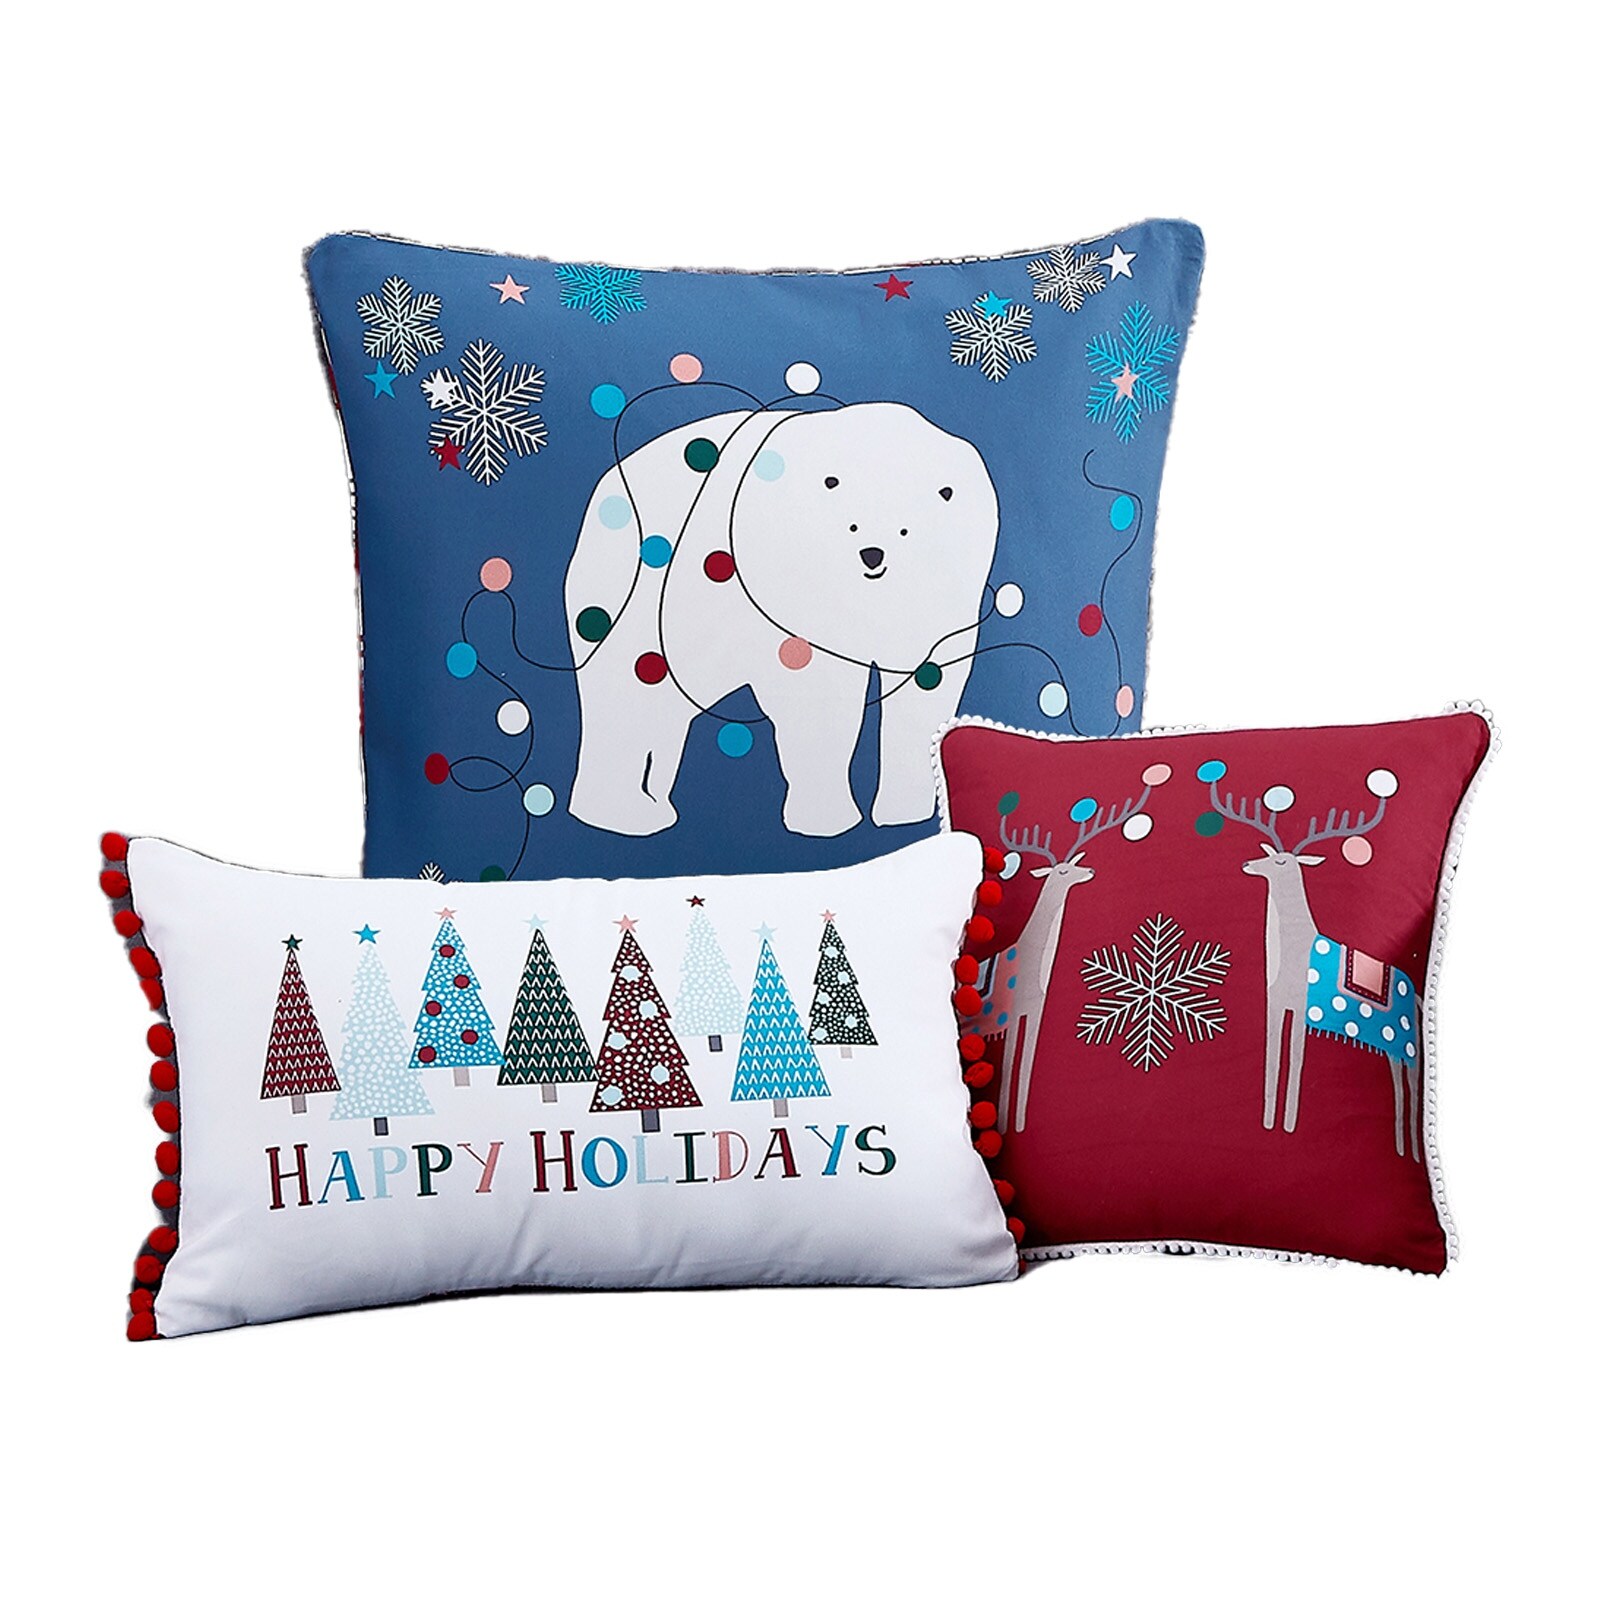 Winter Wonderland Holiday Collection 3-Piece Throw Pillows